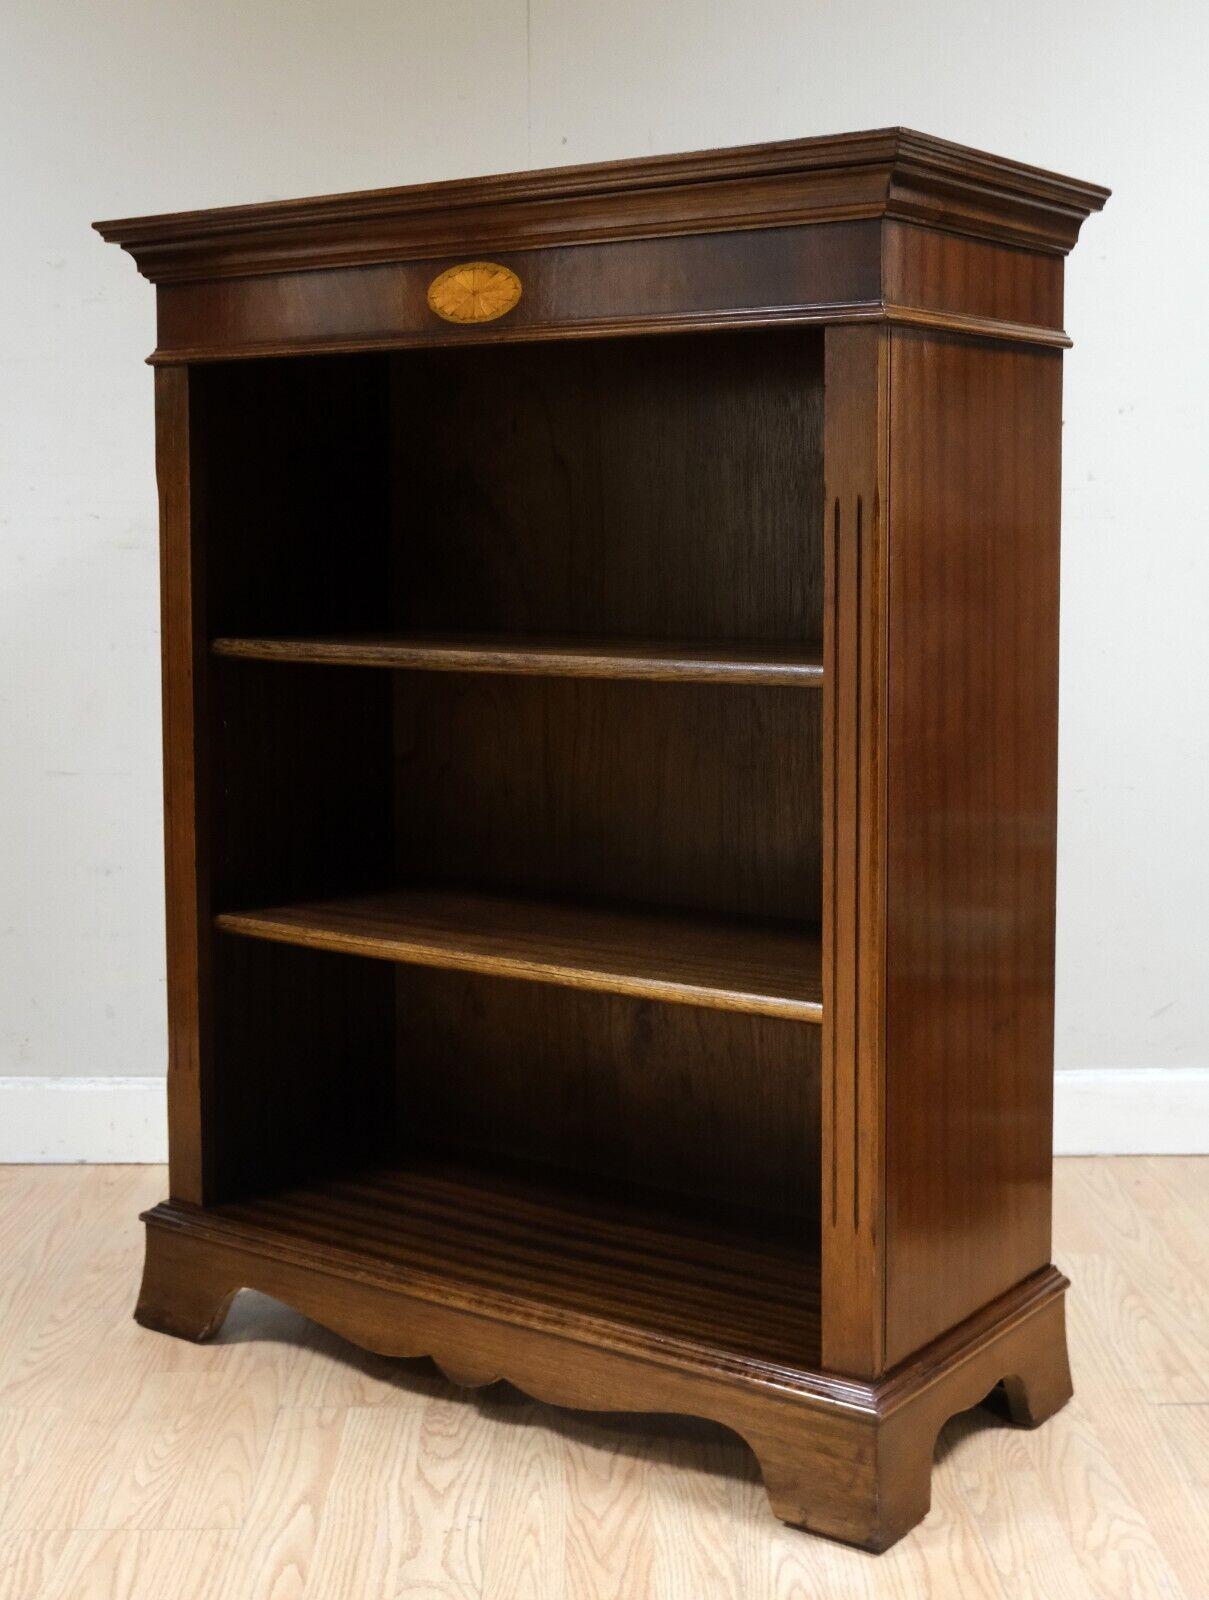 Victorian CHARMING ViNTAGE FLAMED HARDWOOD OPEN LIBRARY BOOKCASE WITH ADJUSTABLE SHELVES